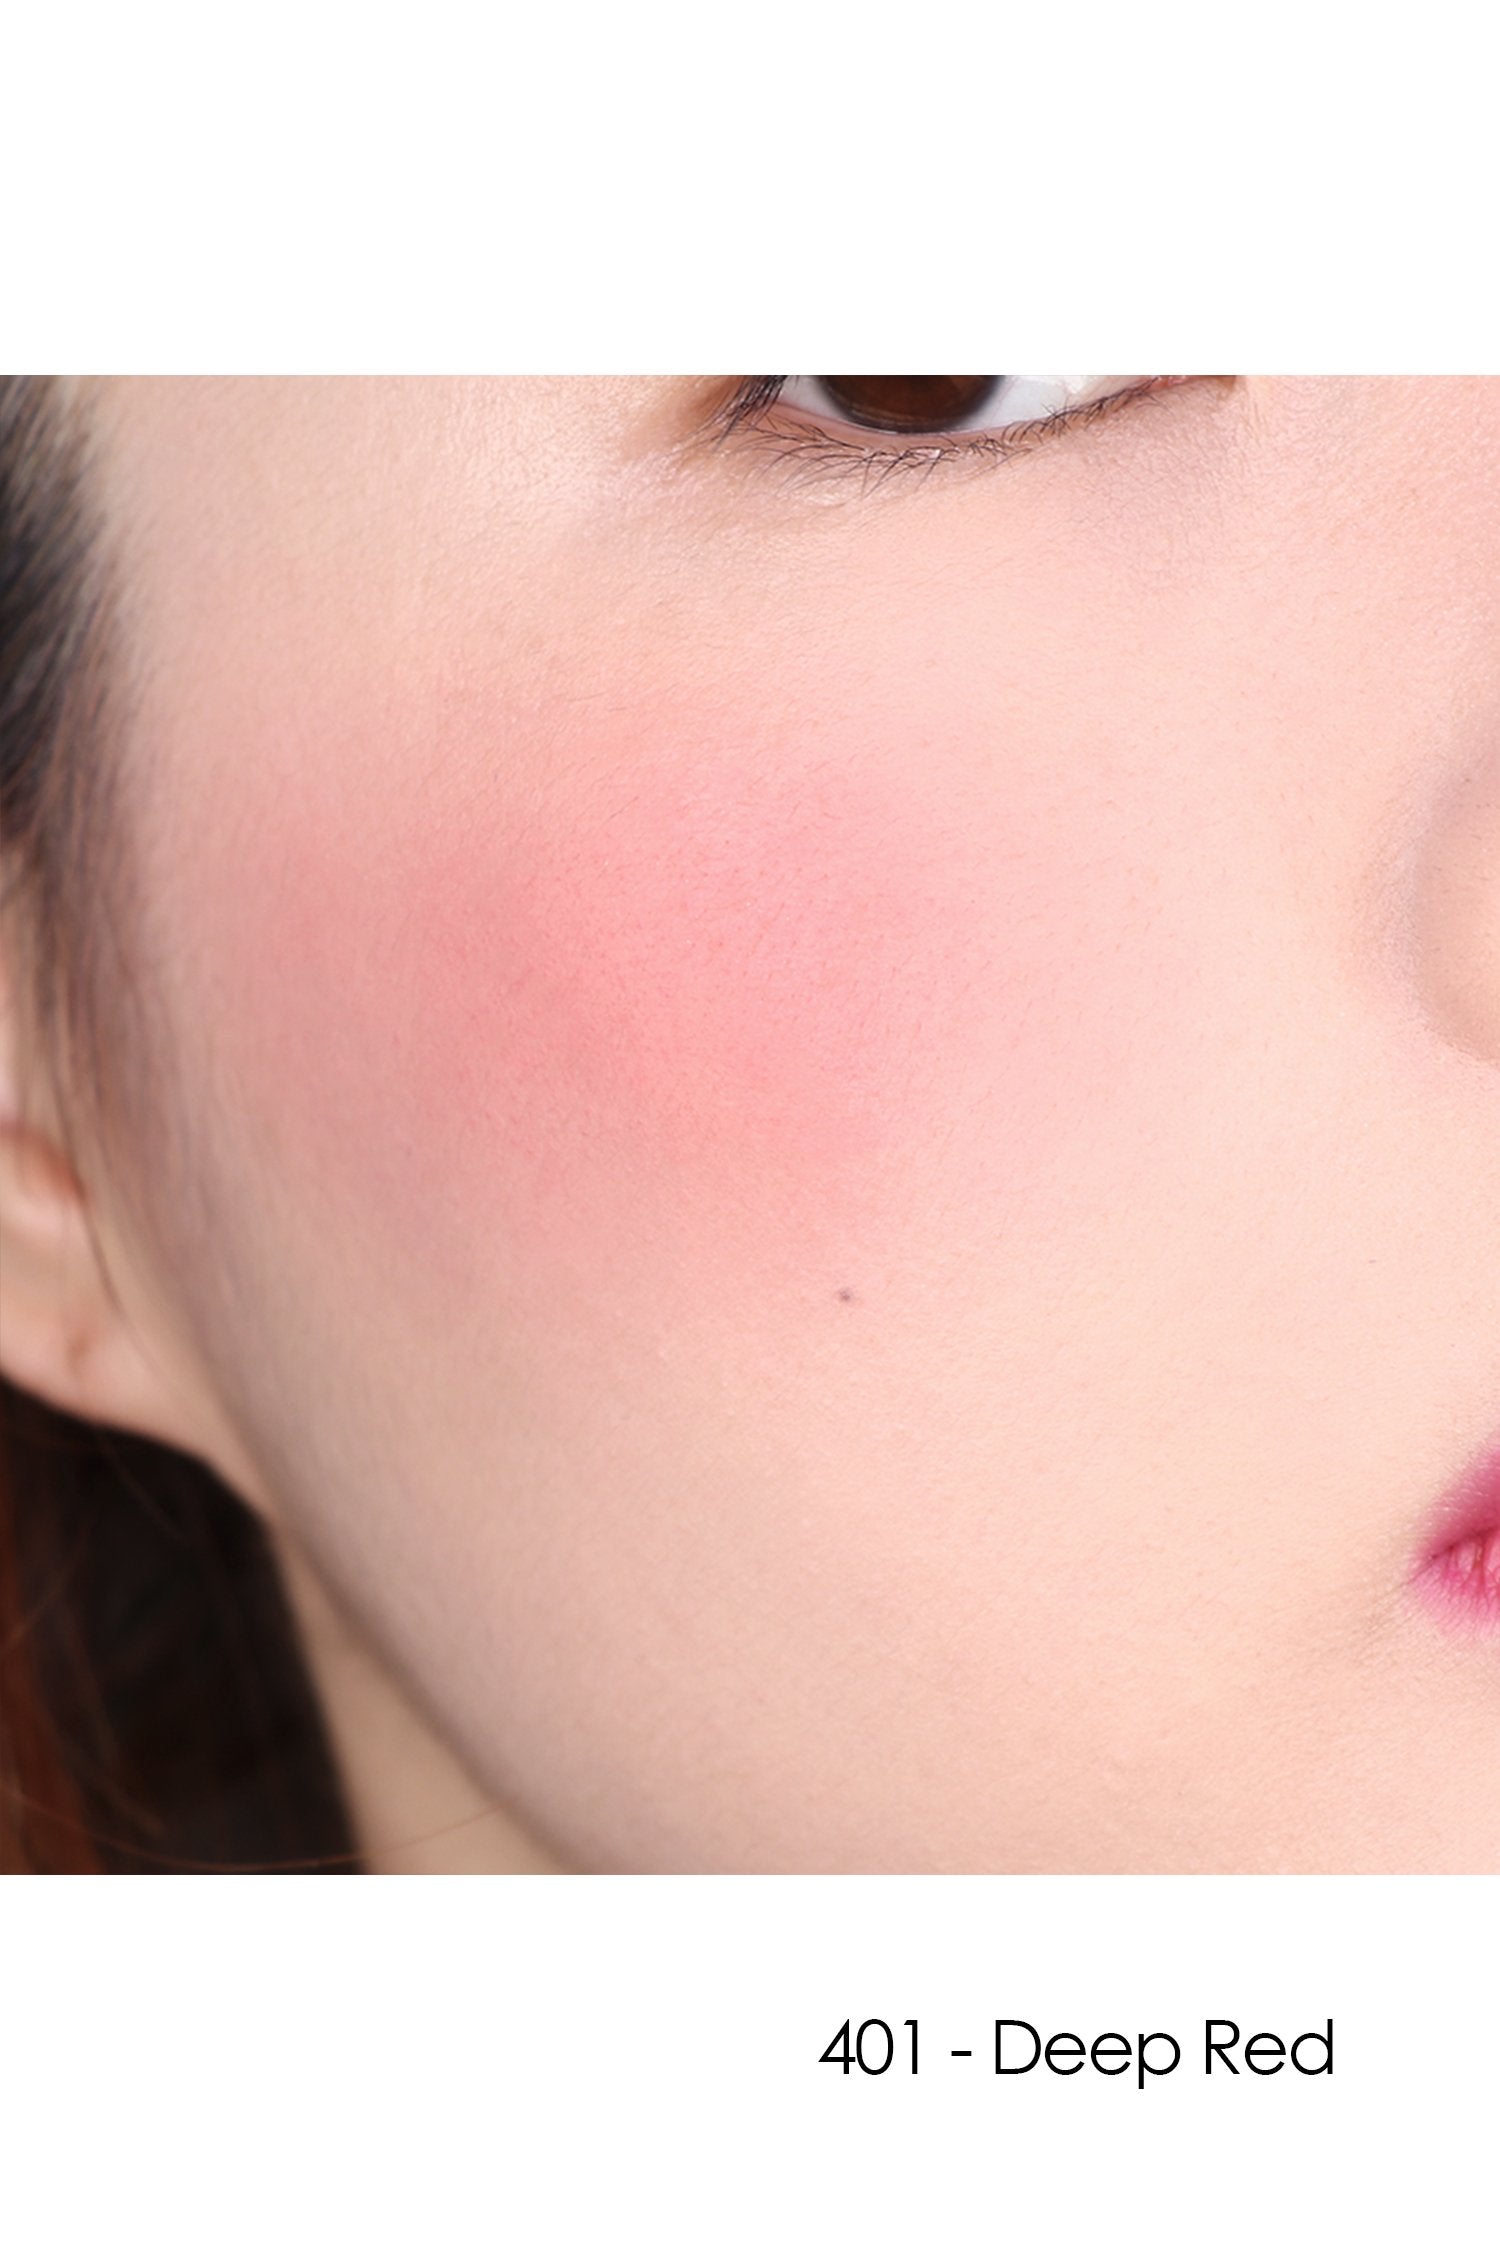 The gorgeous 401 - Deep Red of this powder spreads on the cheeks and clings tightly on the skin.